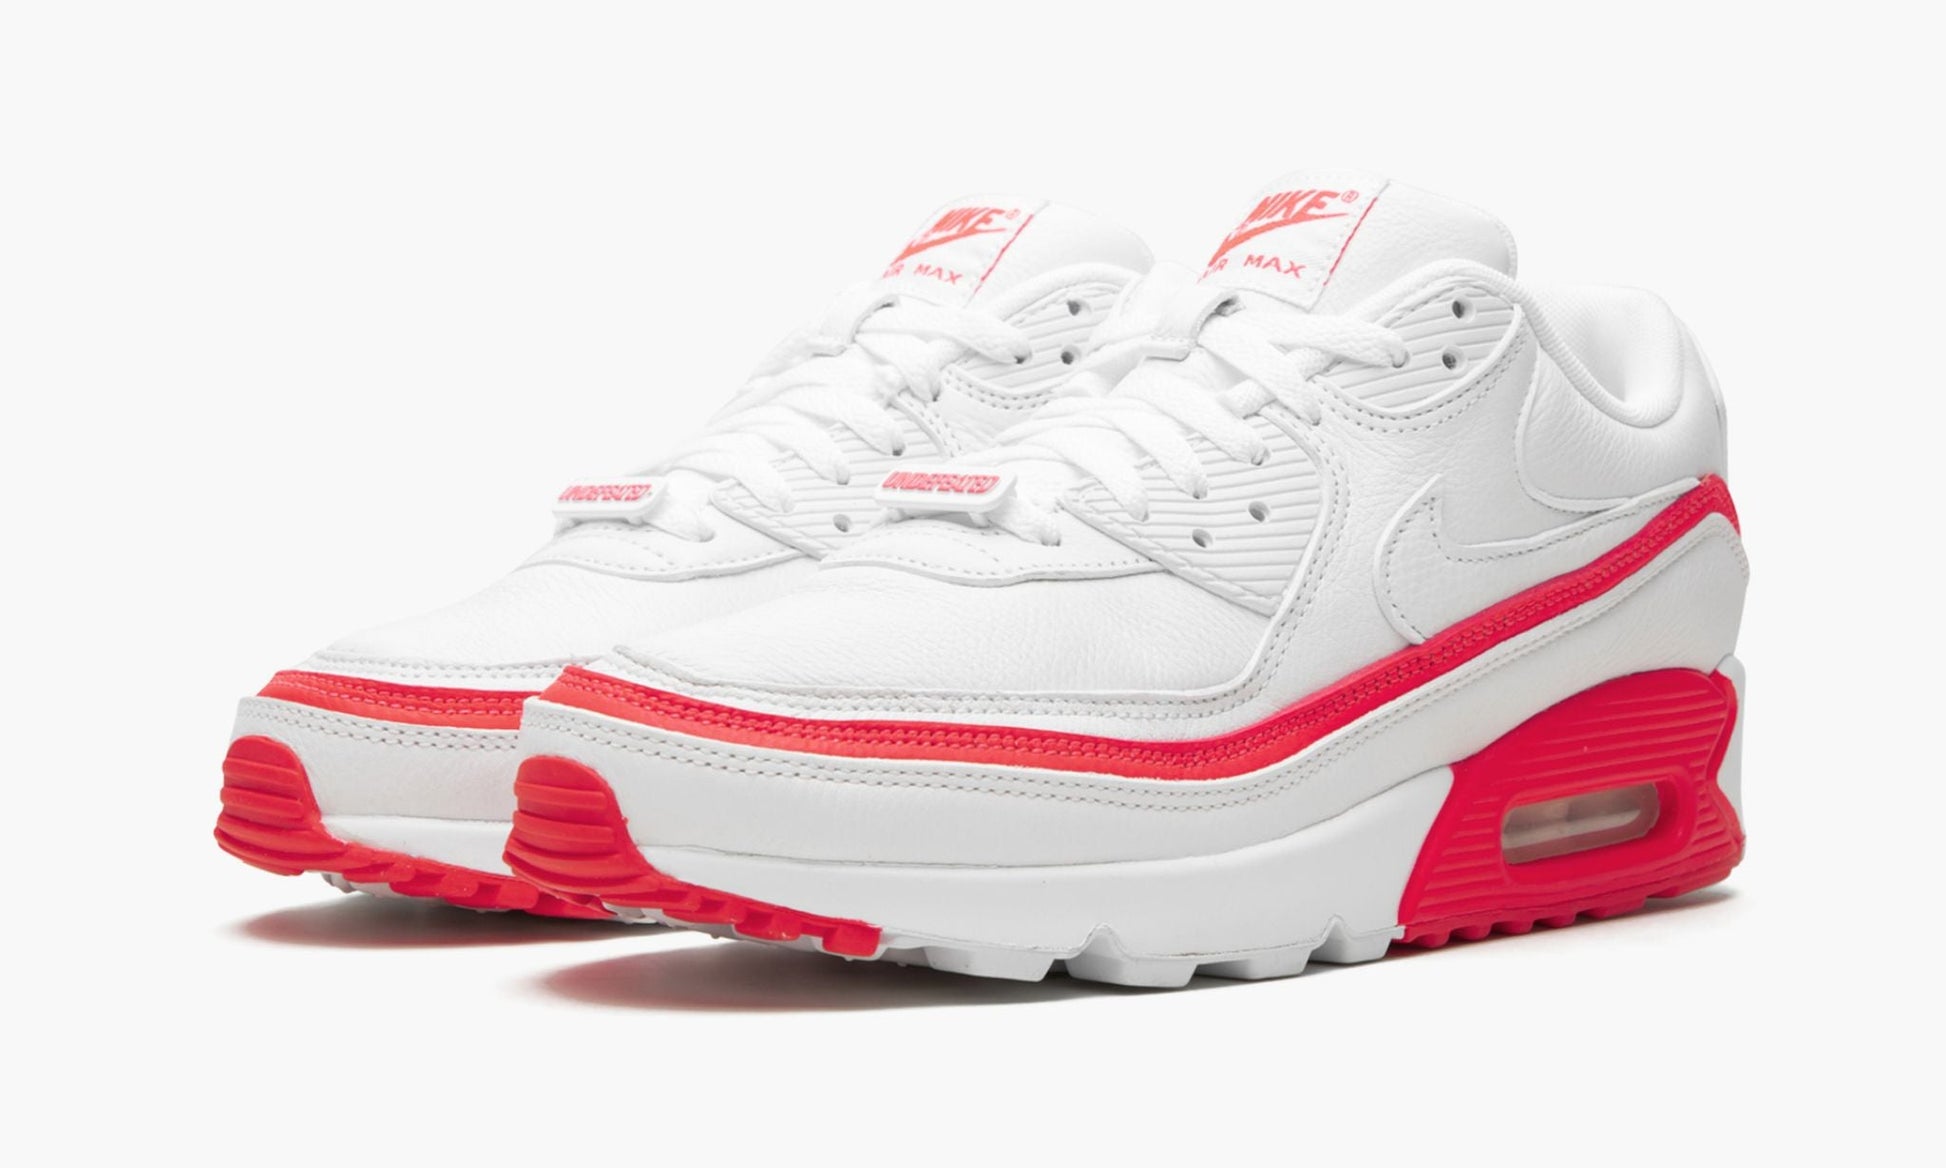 Air Max 90 / UNDFTD "Undefeated White/Red"